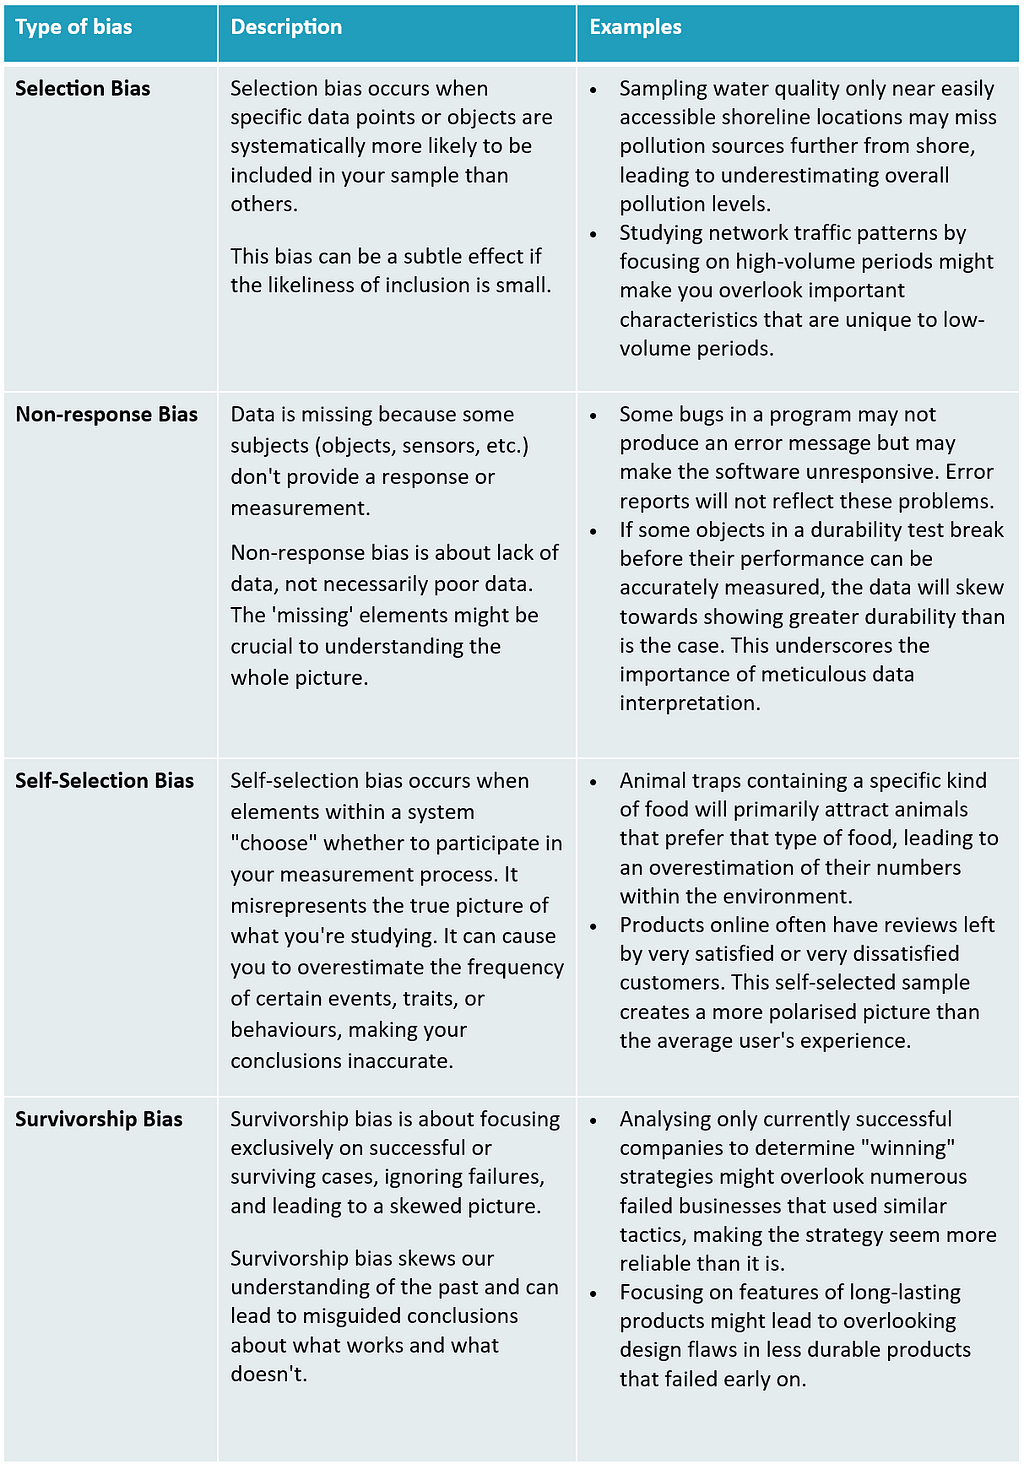 A table describing common types of bias that can affect how samples are created from a larger population. The types of bias are selection bias, non-responsive bias, self-selection bias and survivorship bias.